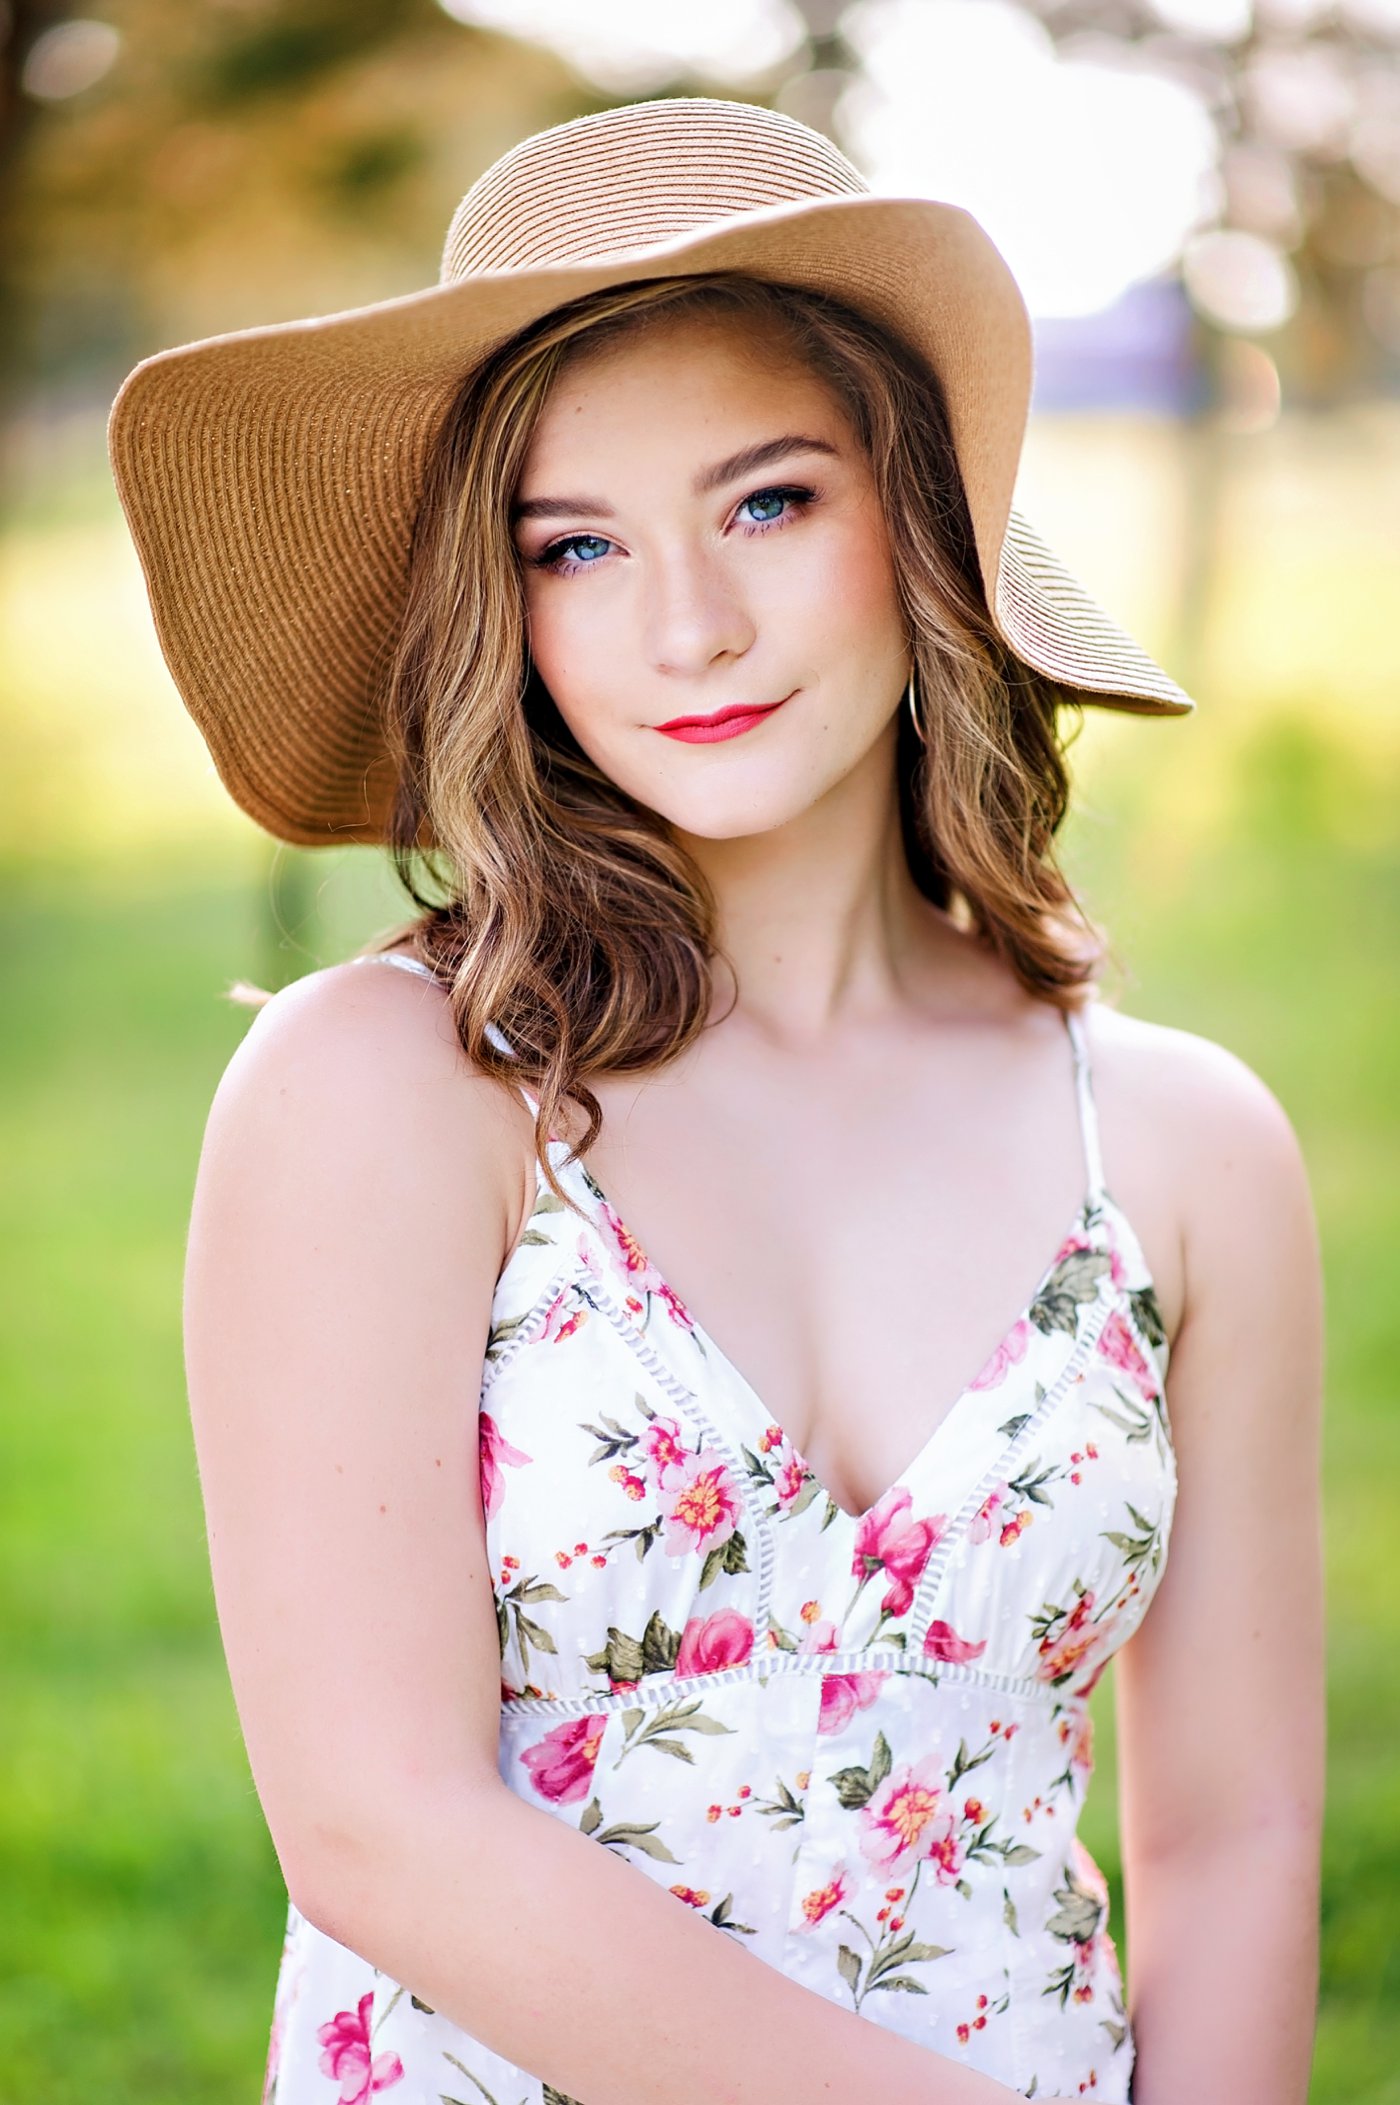 senior picture poses- chin out and down, angle body toward camera- by amber kay senior photography